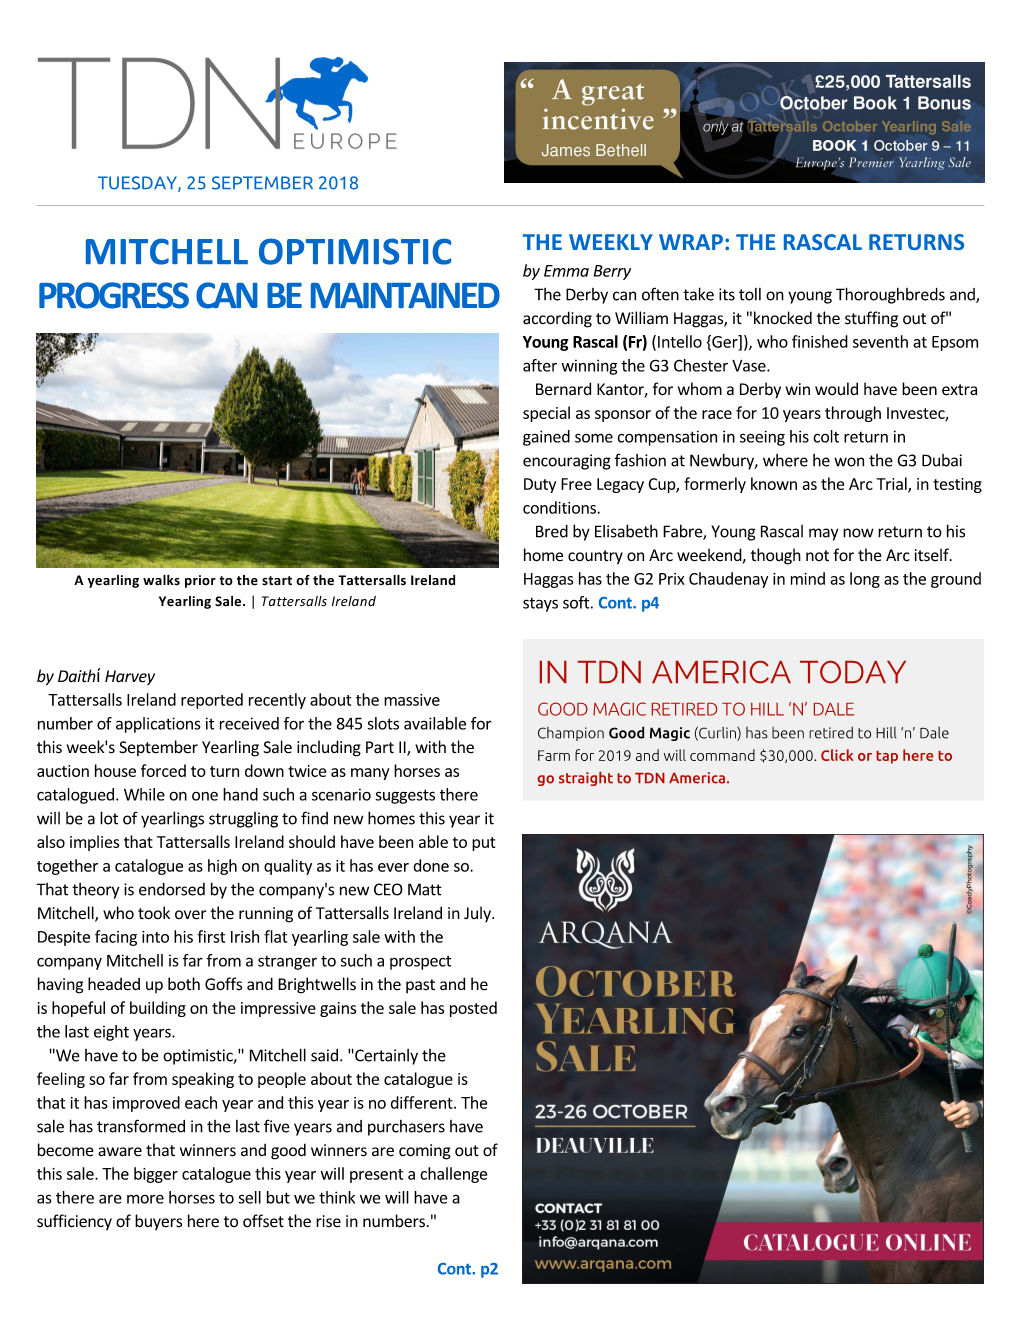 Mitchell Optimistic Progress Can Be Maintained